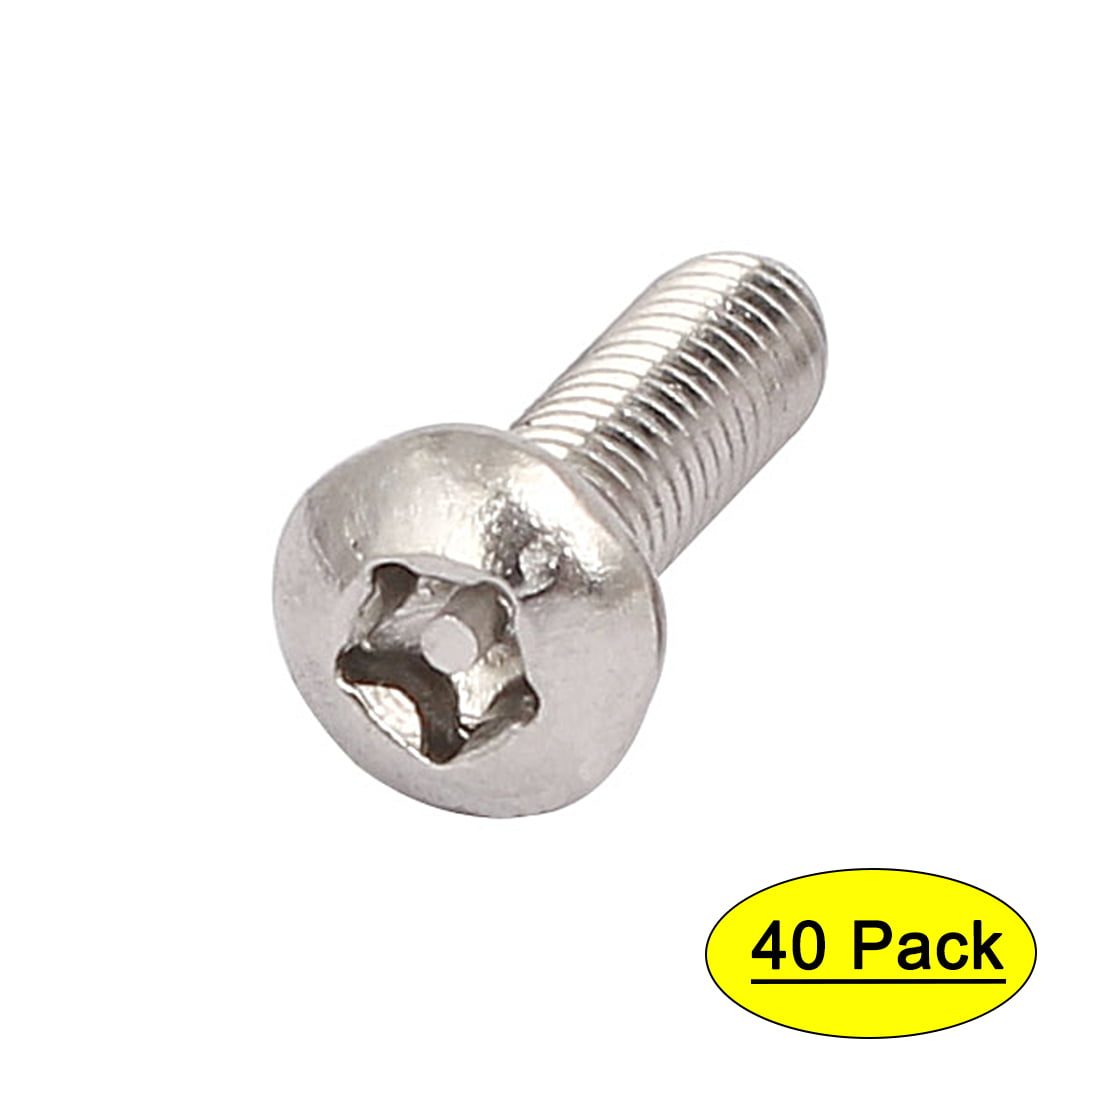 40 @ M3 X 8 STAINLESS STEEL TORX T10 TX10 SECURITY PIN COUNTERSUNK MACHINE SCREW 